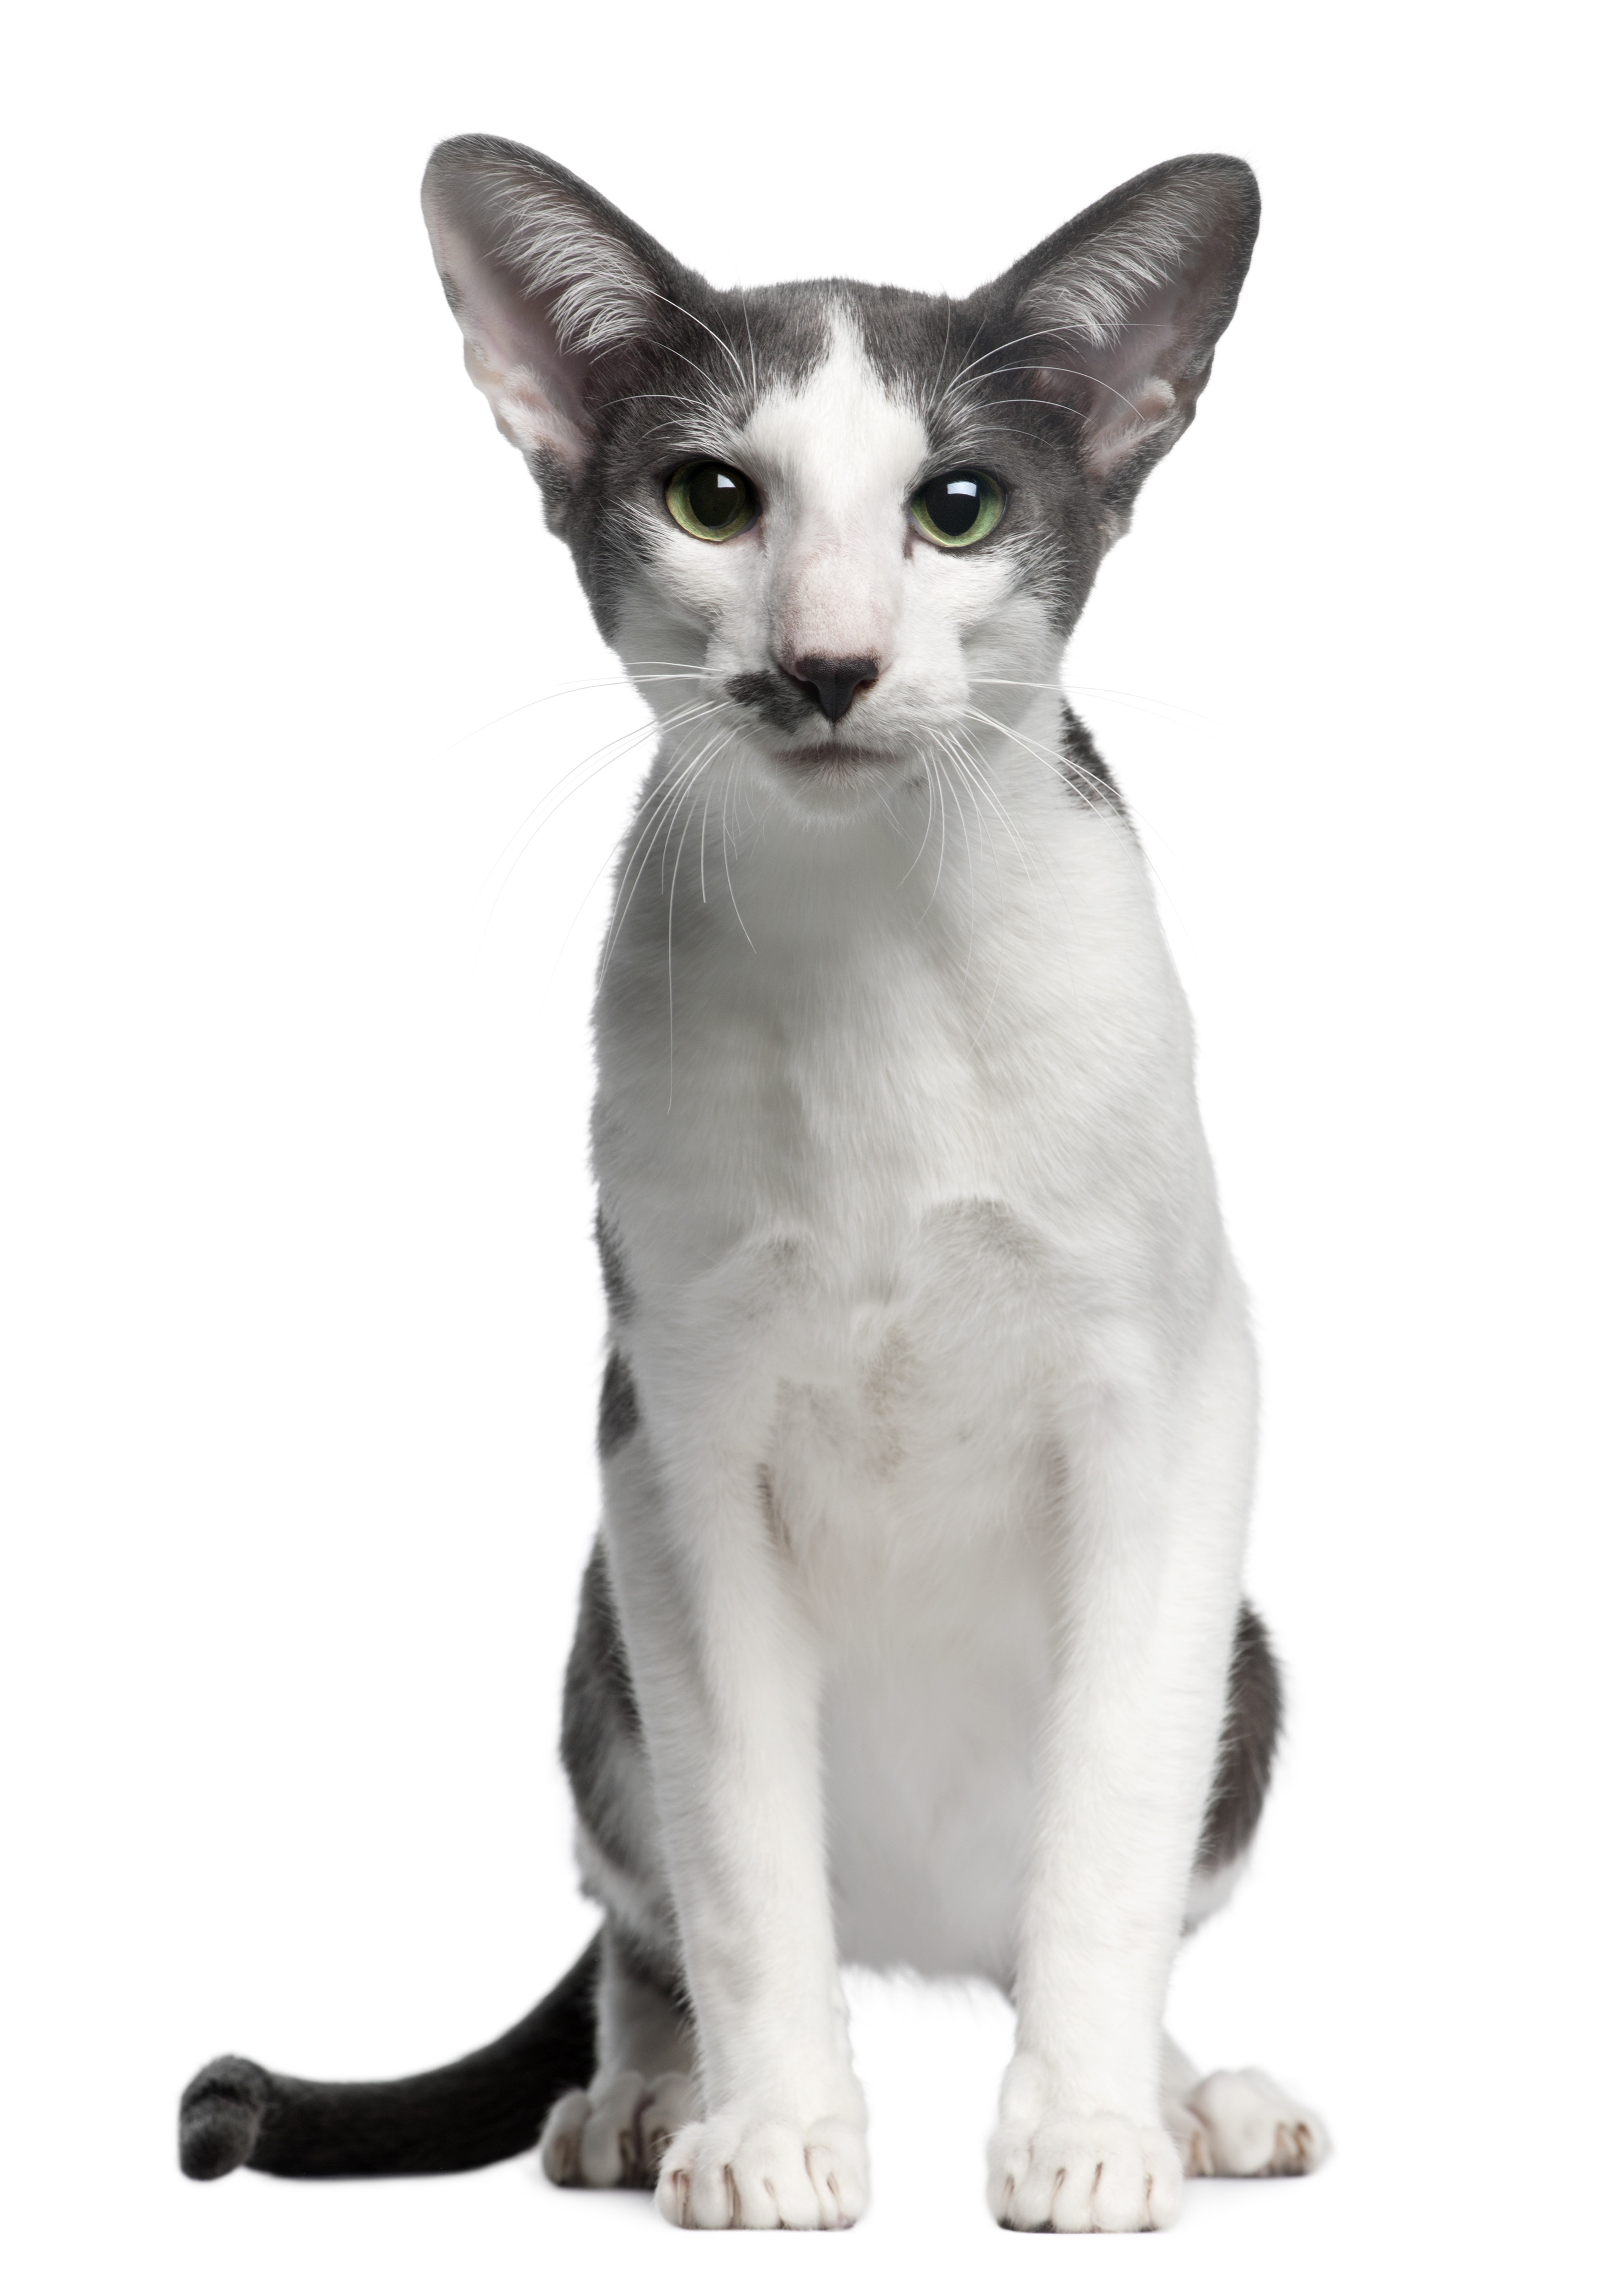 Oriental bicolor cat, 1 year old, sitting in front of white background